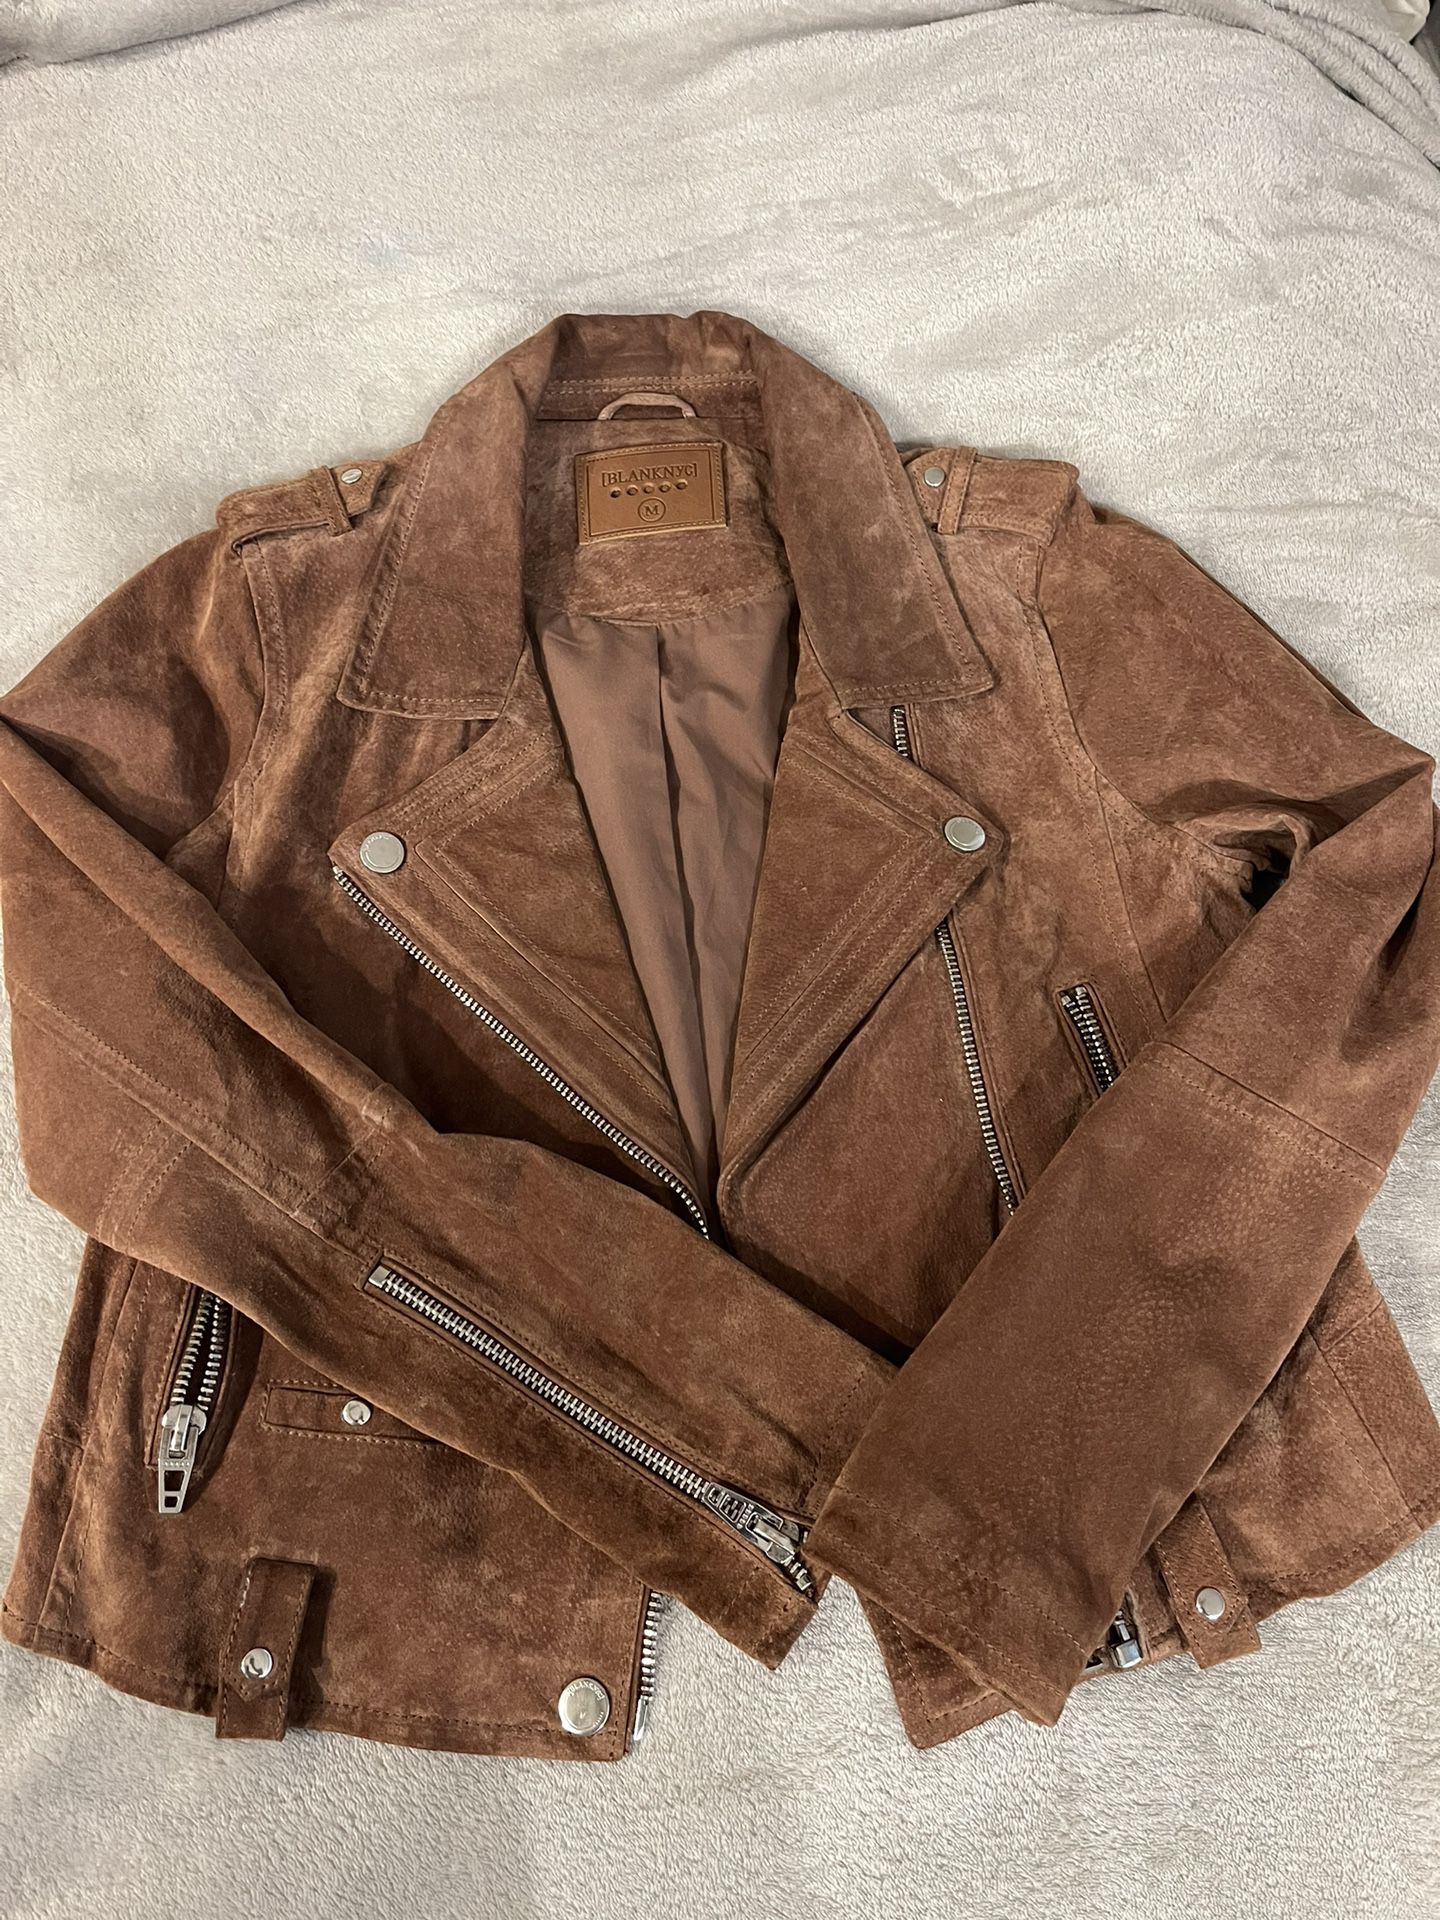 Brown Leather Coat 